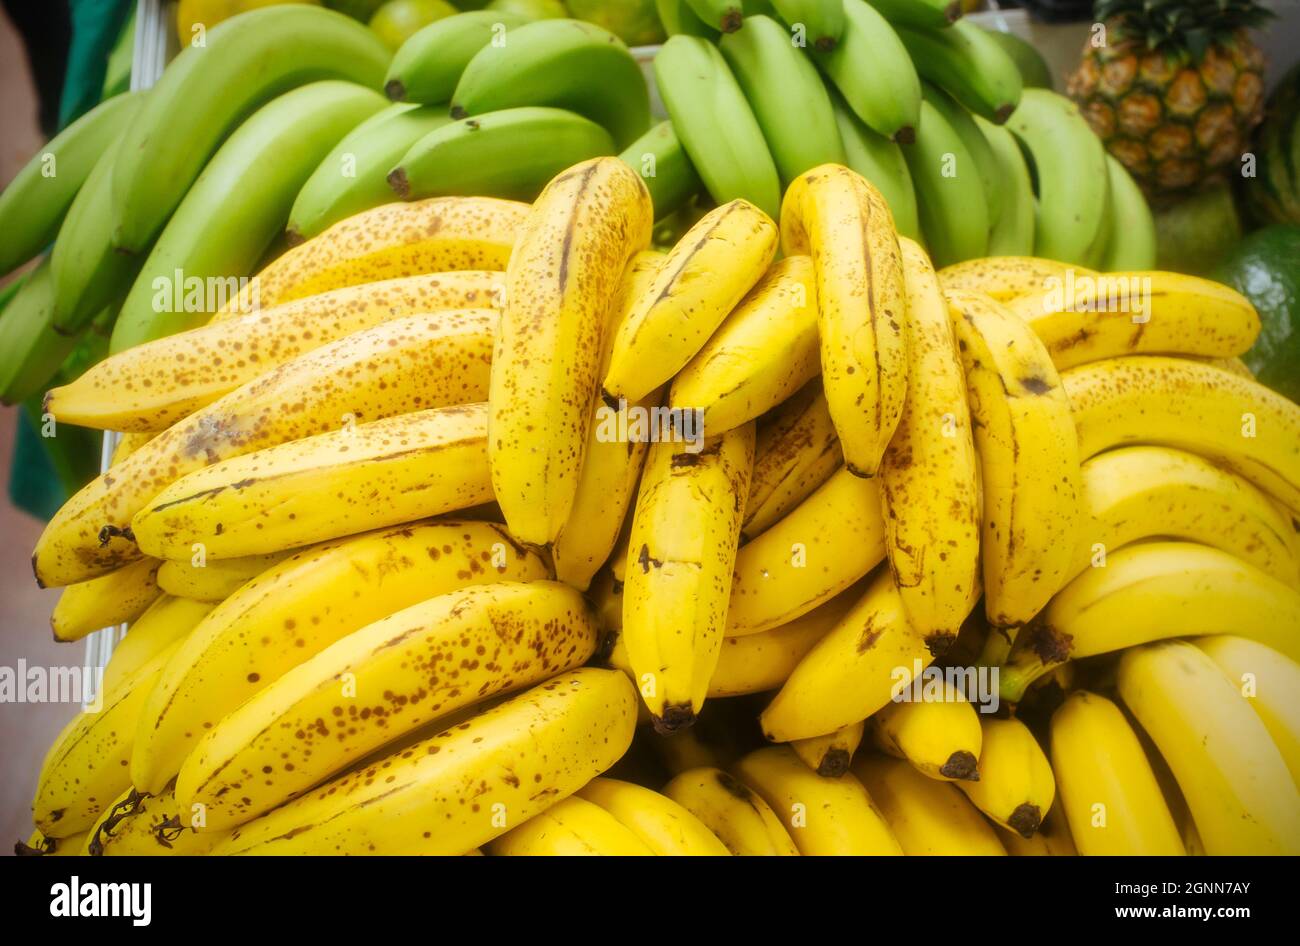 sale of bananas in fruit and vegetable market, display of bananas in public market counter Stock Photo